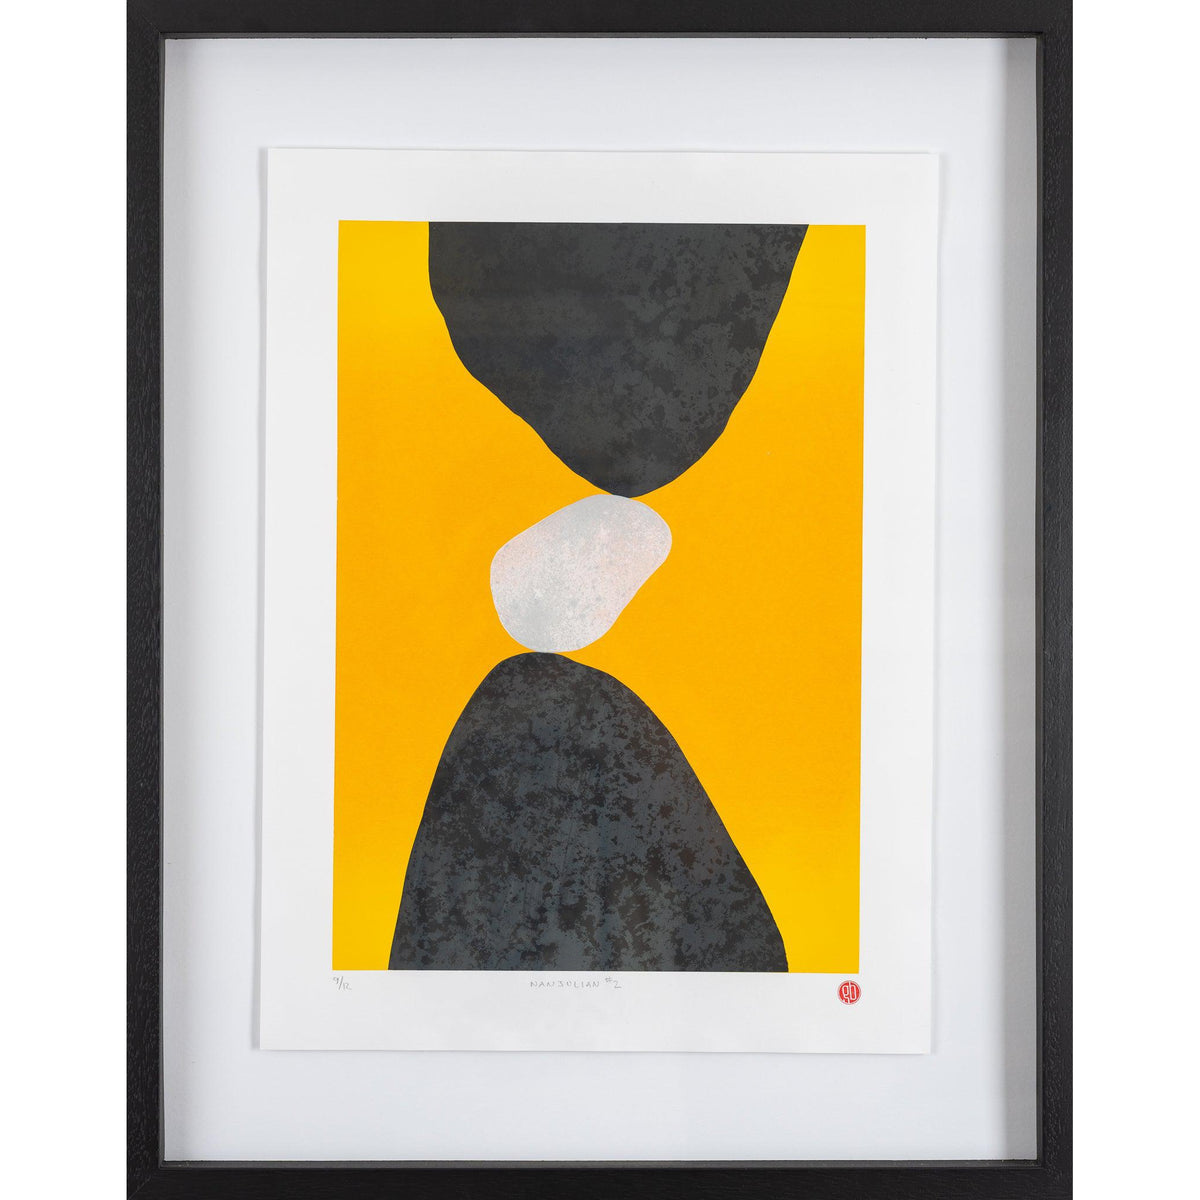 Nanjulian #2, framed limited edition print by Graham Black, available at Padstow Gallery, Cornwall